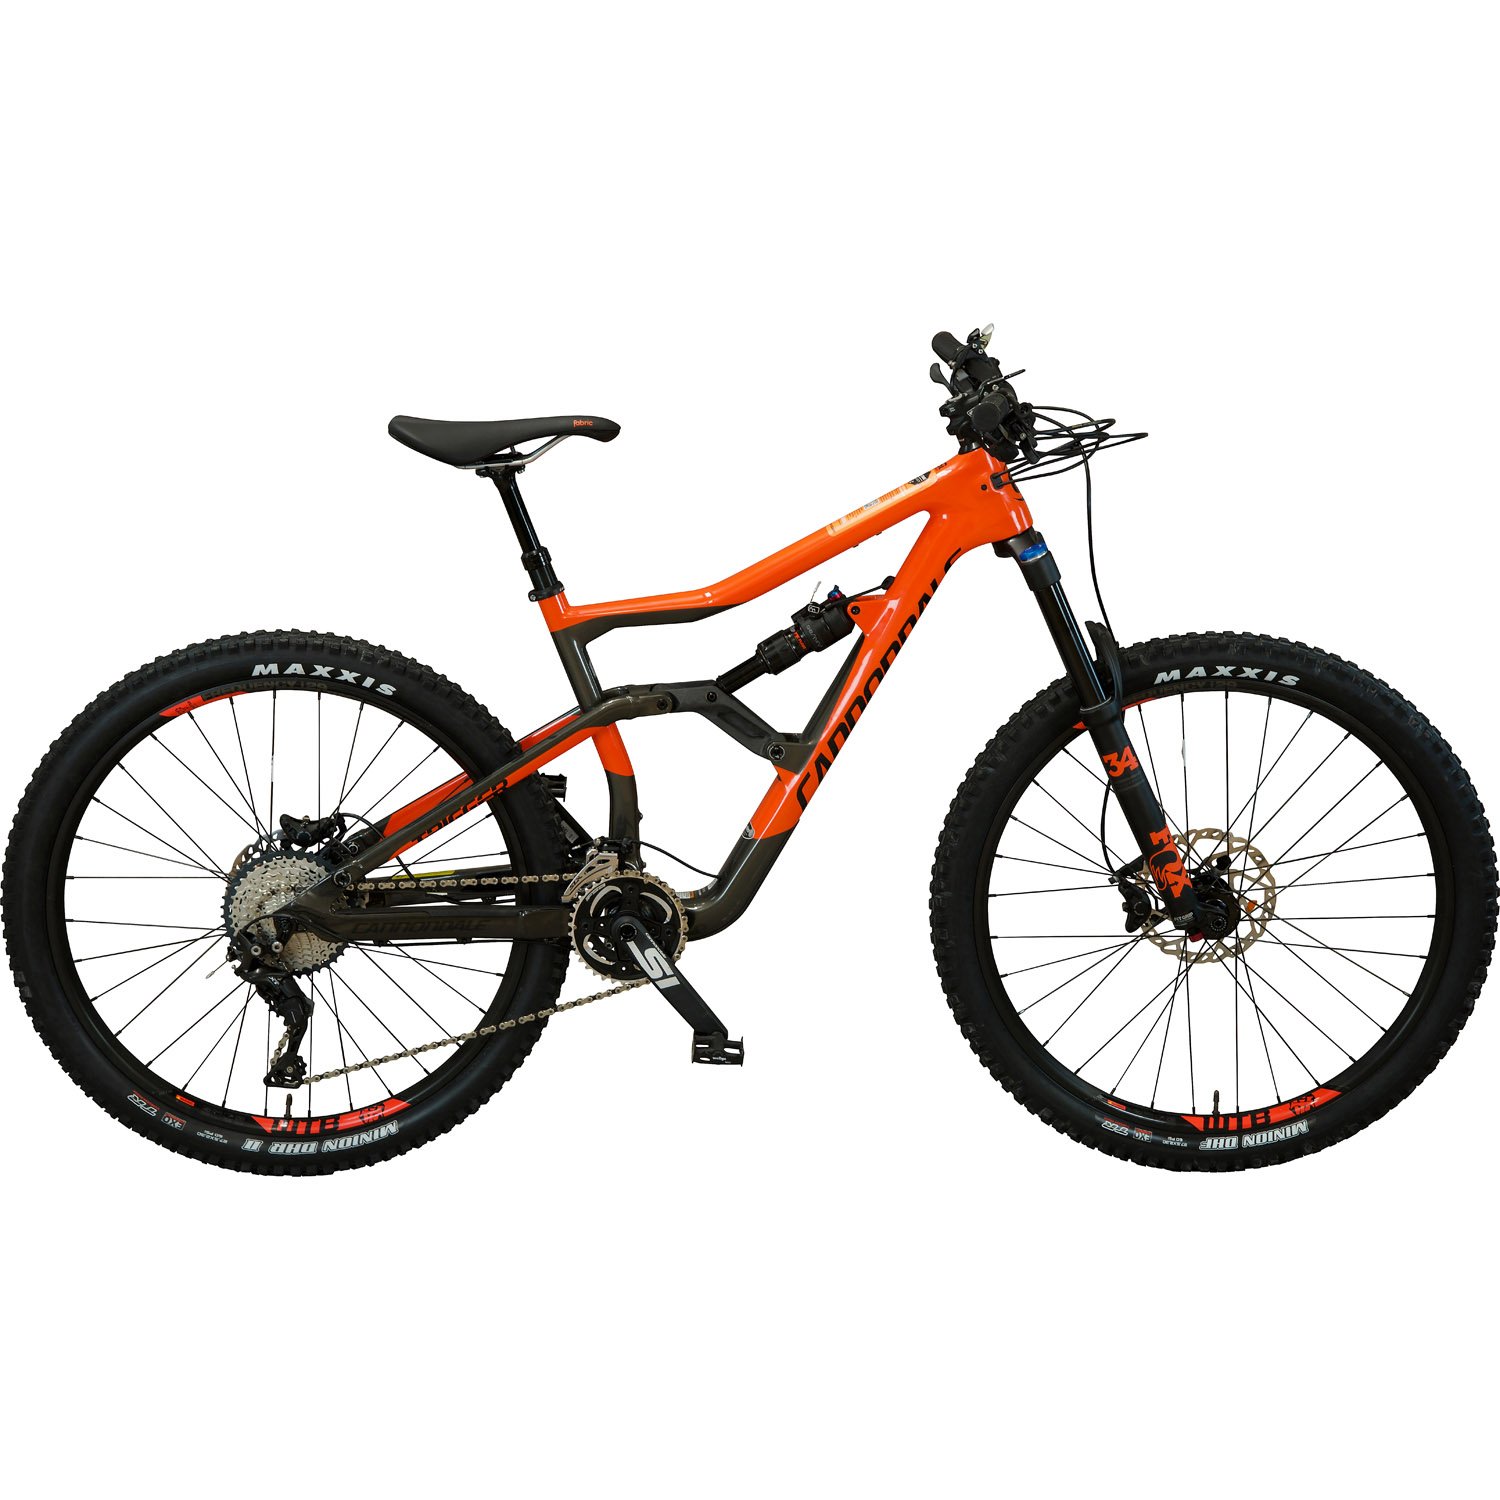 Cannondale Trigger 3 29 Zoll Fully 46 cm | Online Shop ...